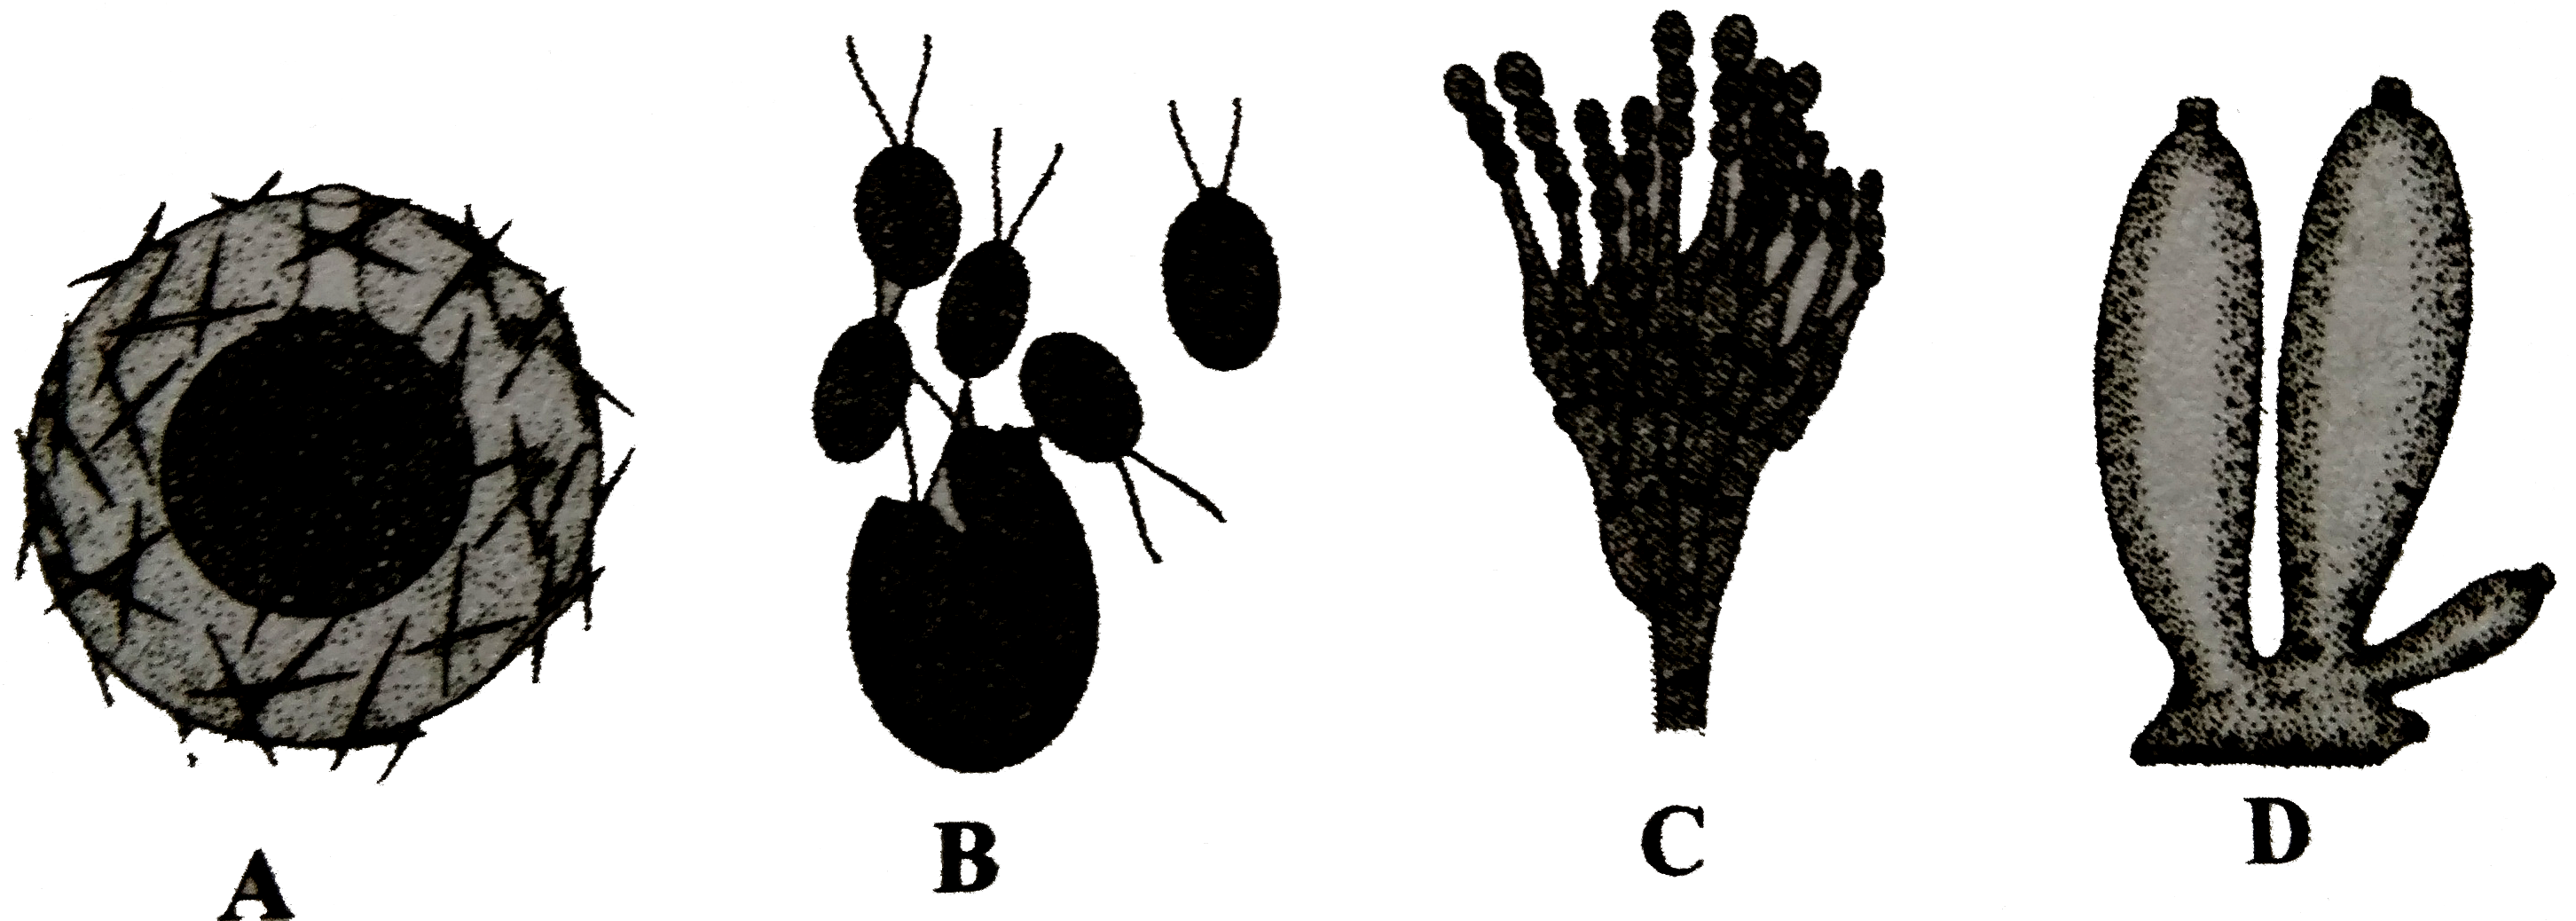 Study the following figures and select the correct statements regarding these.      (i)A shows mode of asexual reproduction in sponges through internal buds.   (ii)B shows sexual reprodction through zoospores in Chlamydomonas.   (iii) C shows asexual reproduction through fragmentation in Penicullium.   (iv) D shows external budding in Sycon.